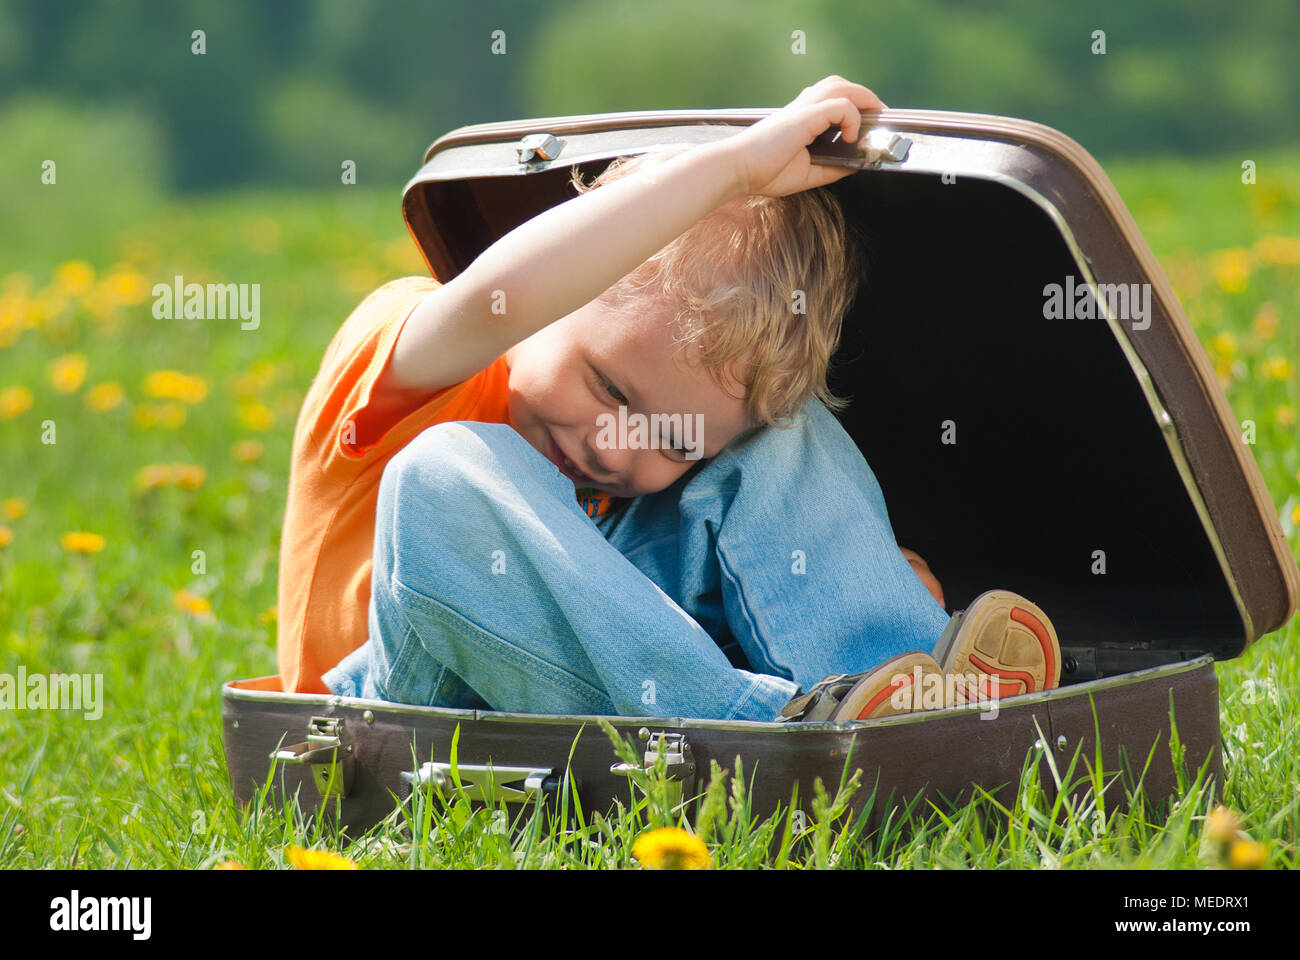 Cute little funny child trying to hide inside of vintage brown suitcase. Boy laughs and smiles happily while playing outdoors on green grass lawn full Stock Photo